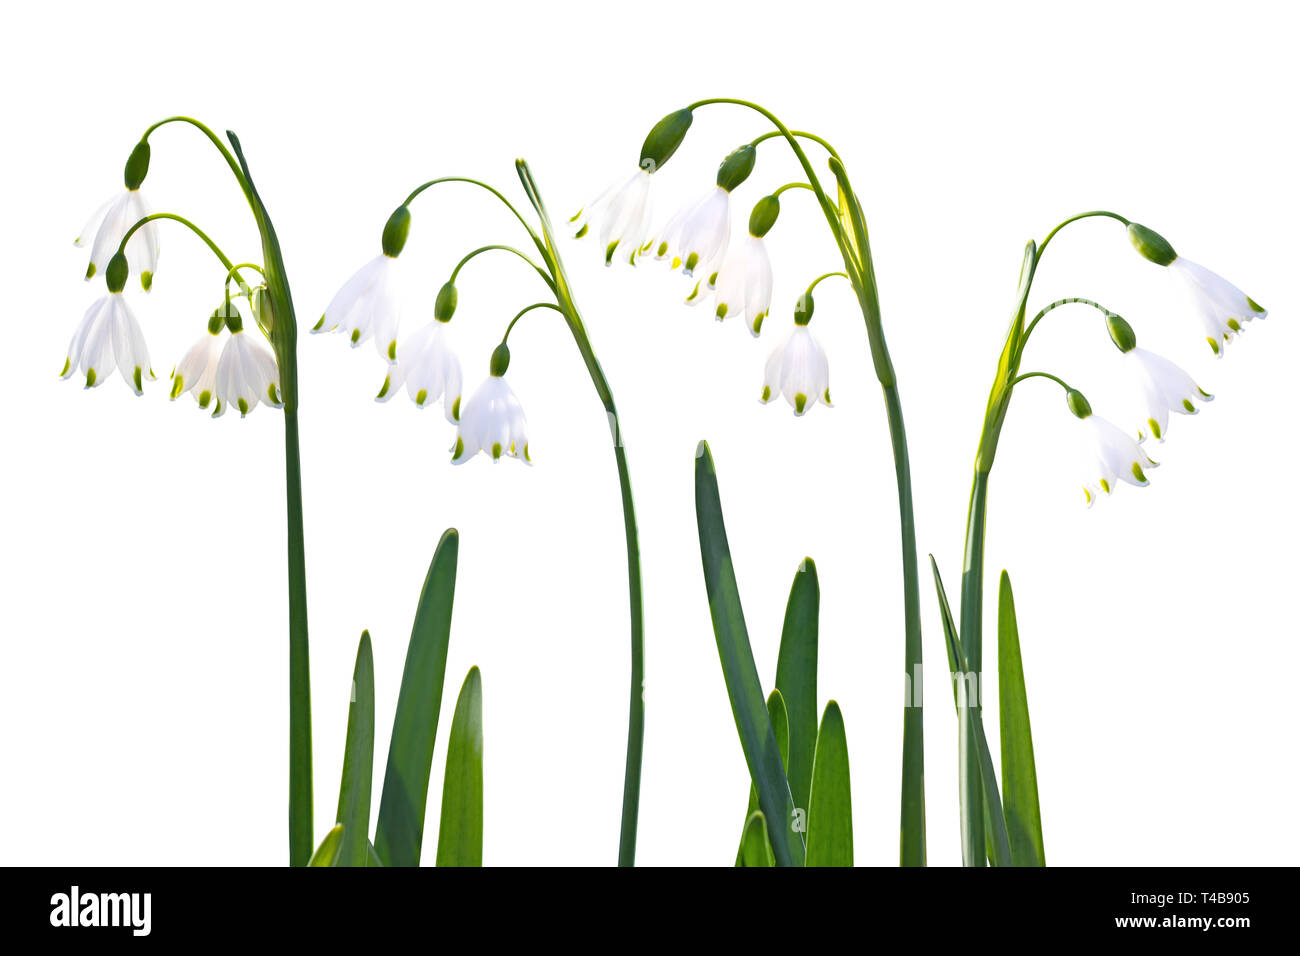 Snowdrop or galanthus spring flowers set isolated on white Stock Photo